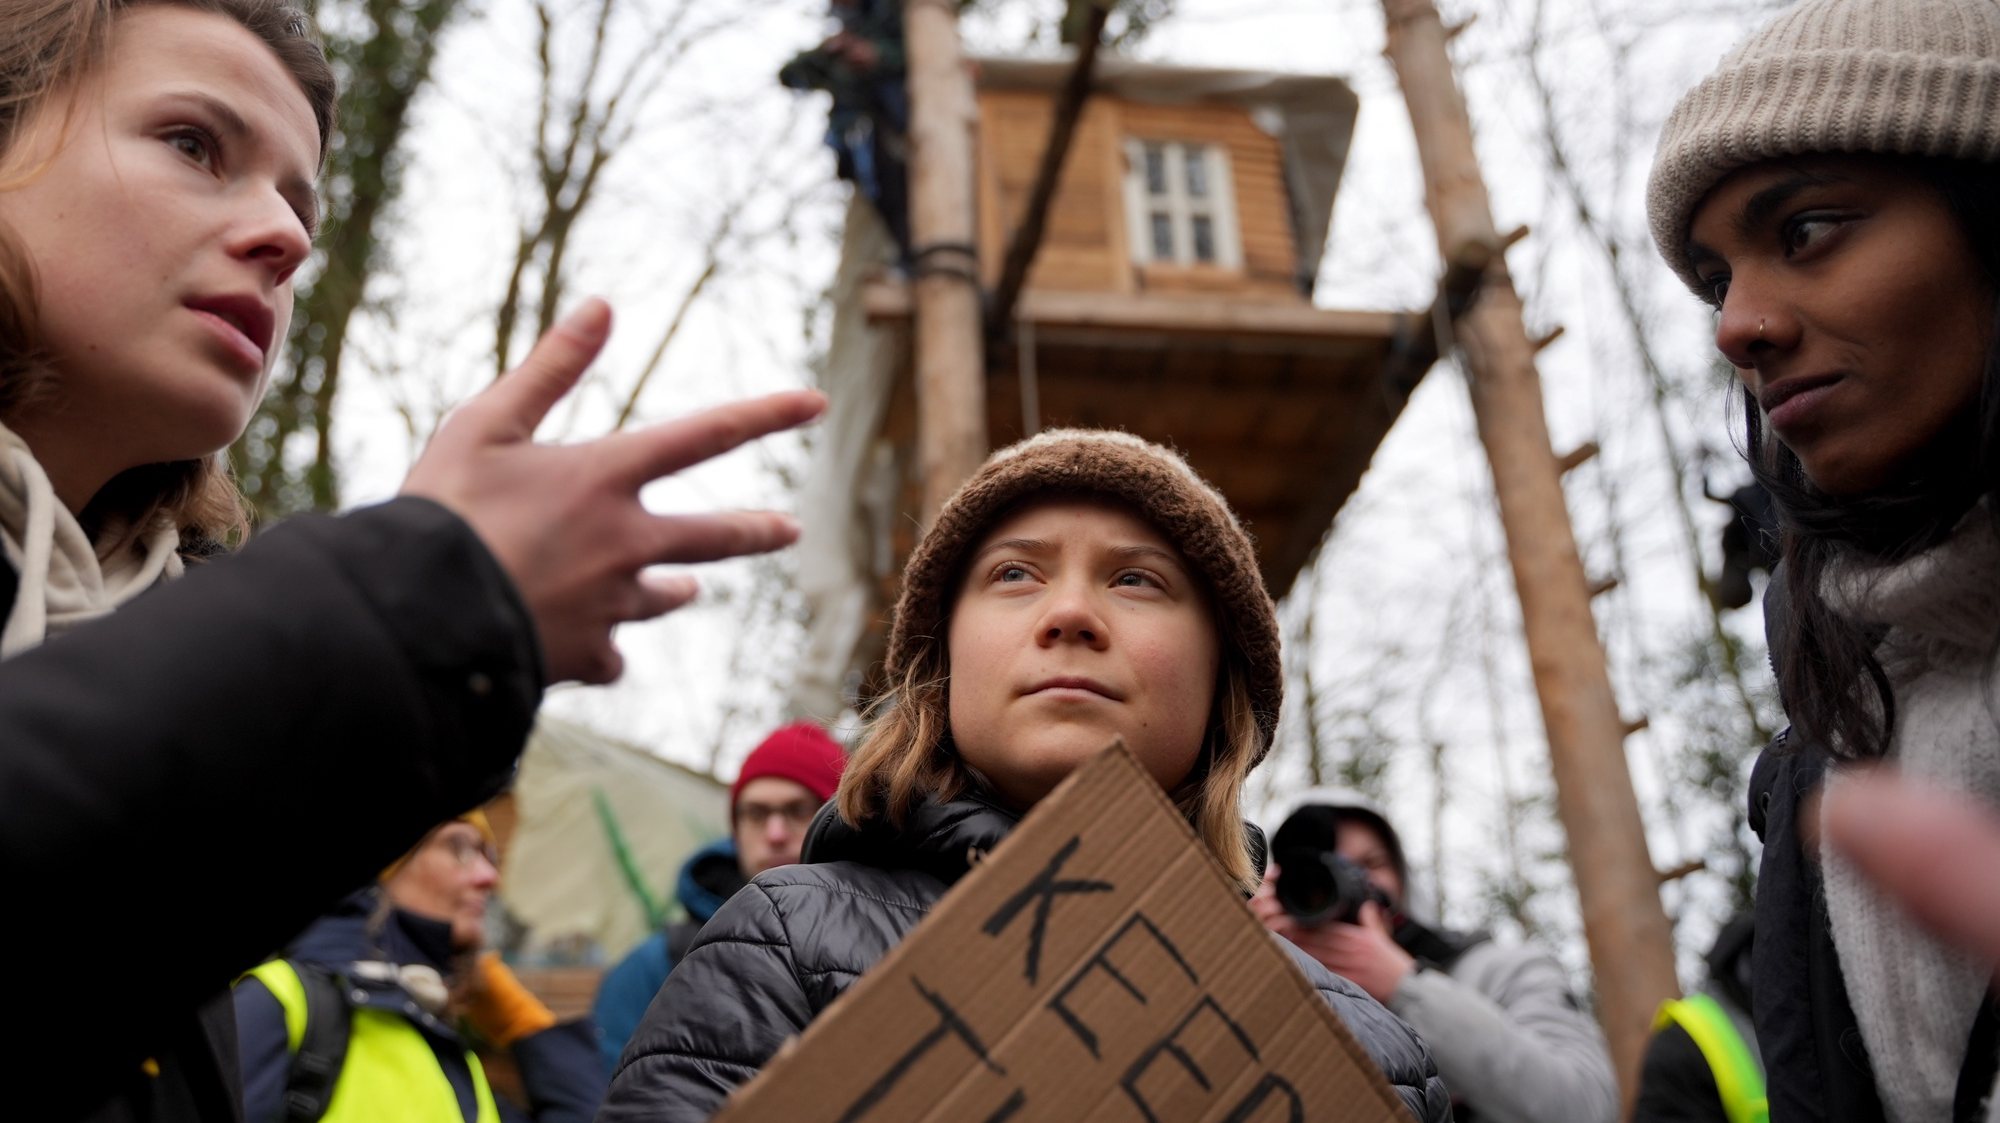 epa10403539 Environmental activists Luisa Neubauer (L), Greta Thunberg (C) and Lakshimi Thevasagayam(R) pictured at the village of Luetzerath, Germany, 13 January 2023. The village of Luetzerath in North Rhine-Westphalia state is to make way for lignite mining despite the decision to phase out coal. The Garzweiler open pit mine, operated by German energy supplier RWE, is at the focus of protests by people who want Germany to stop mining and burning coal as soon as possible in the fight against climate change.  EPA/FINN BECKER